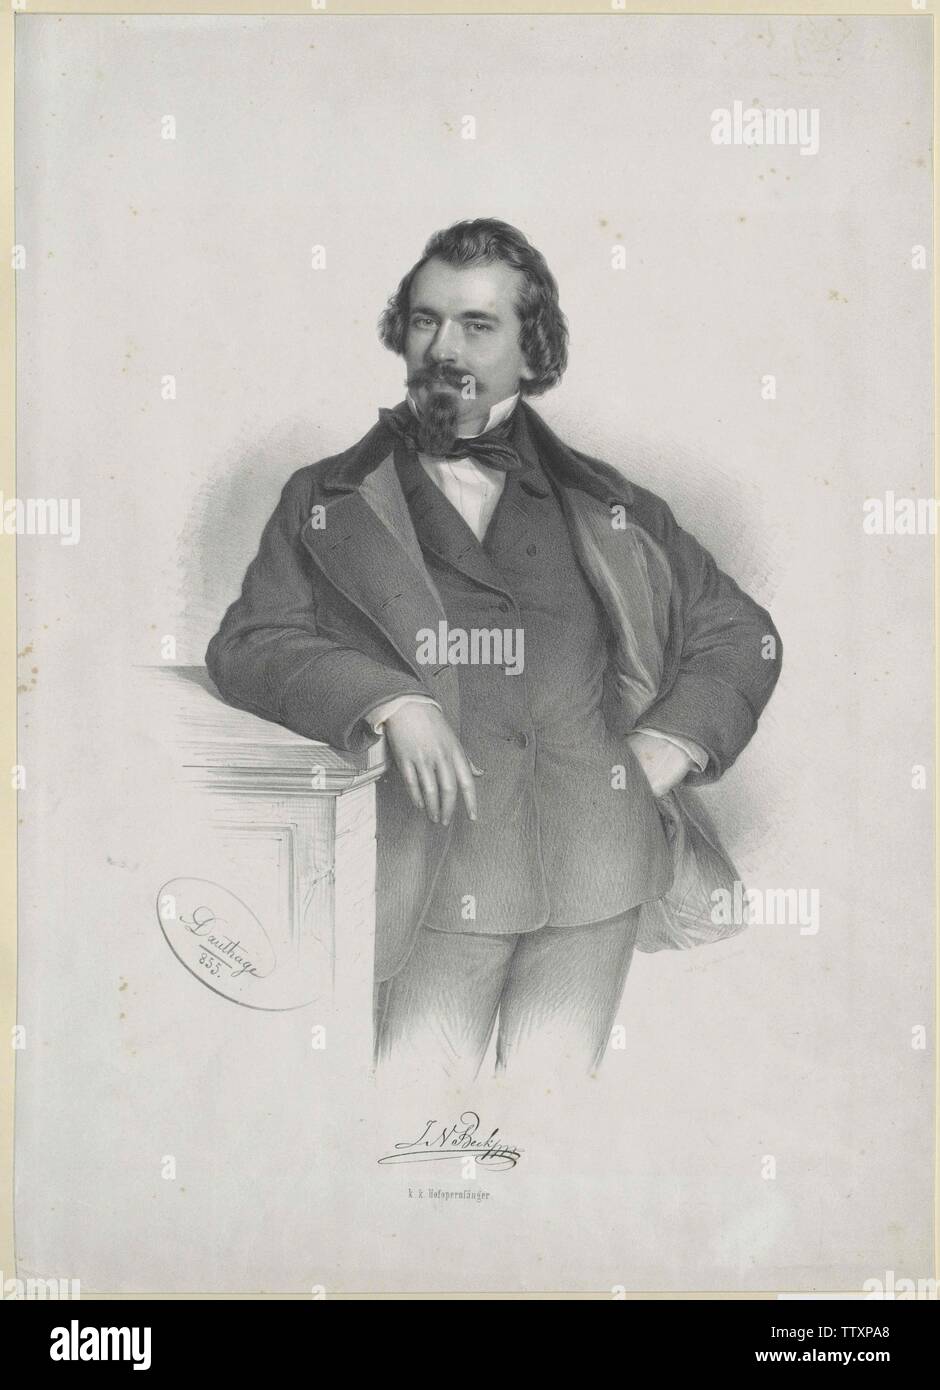 Beck, Johann Nepomuk, opera singer (baritone), since 1853 at the Viennese Court Opera House, Additional-Rights-Clearance-Info-Not-Available Stock Photo